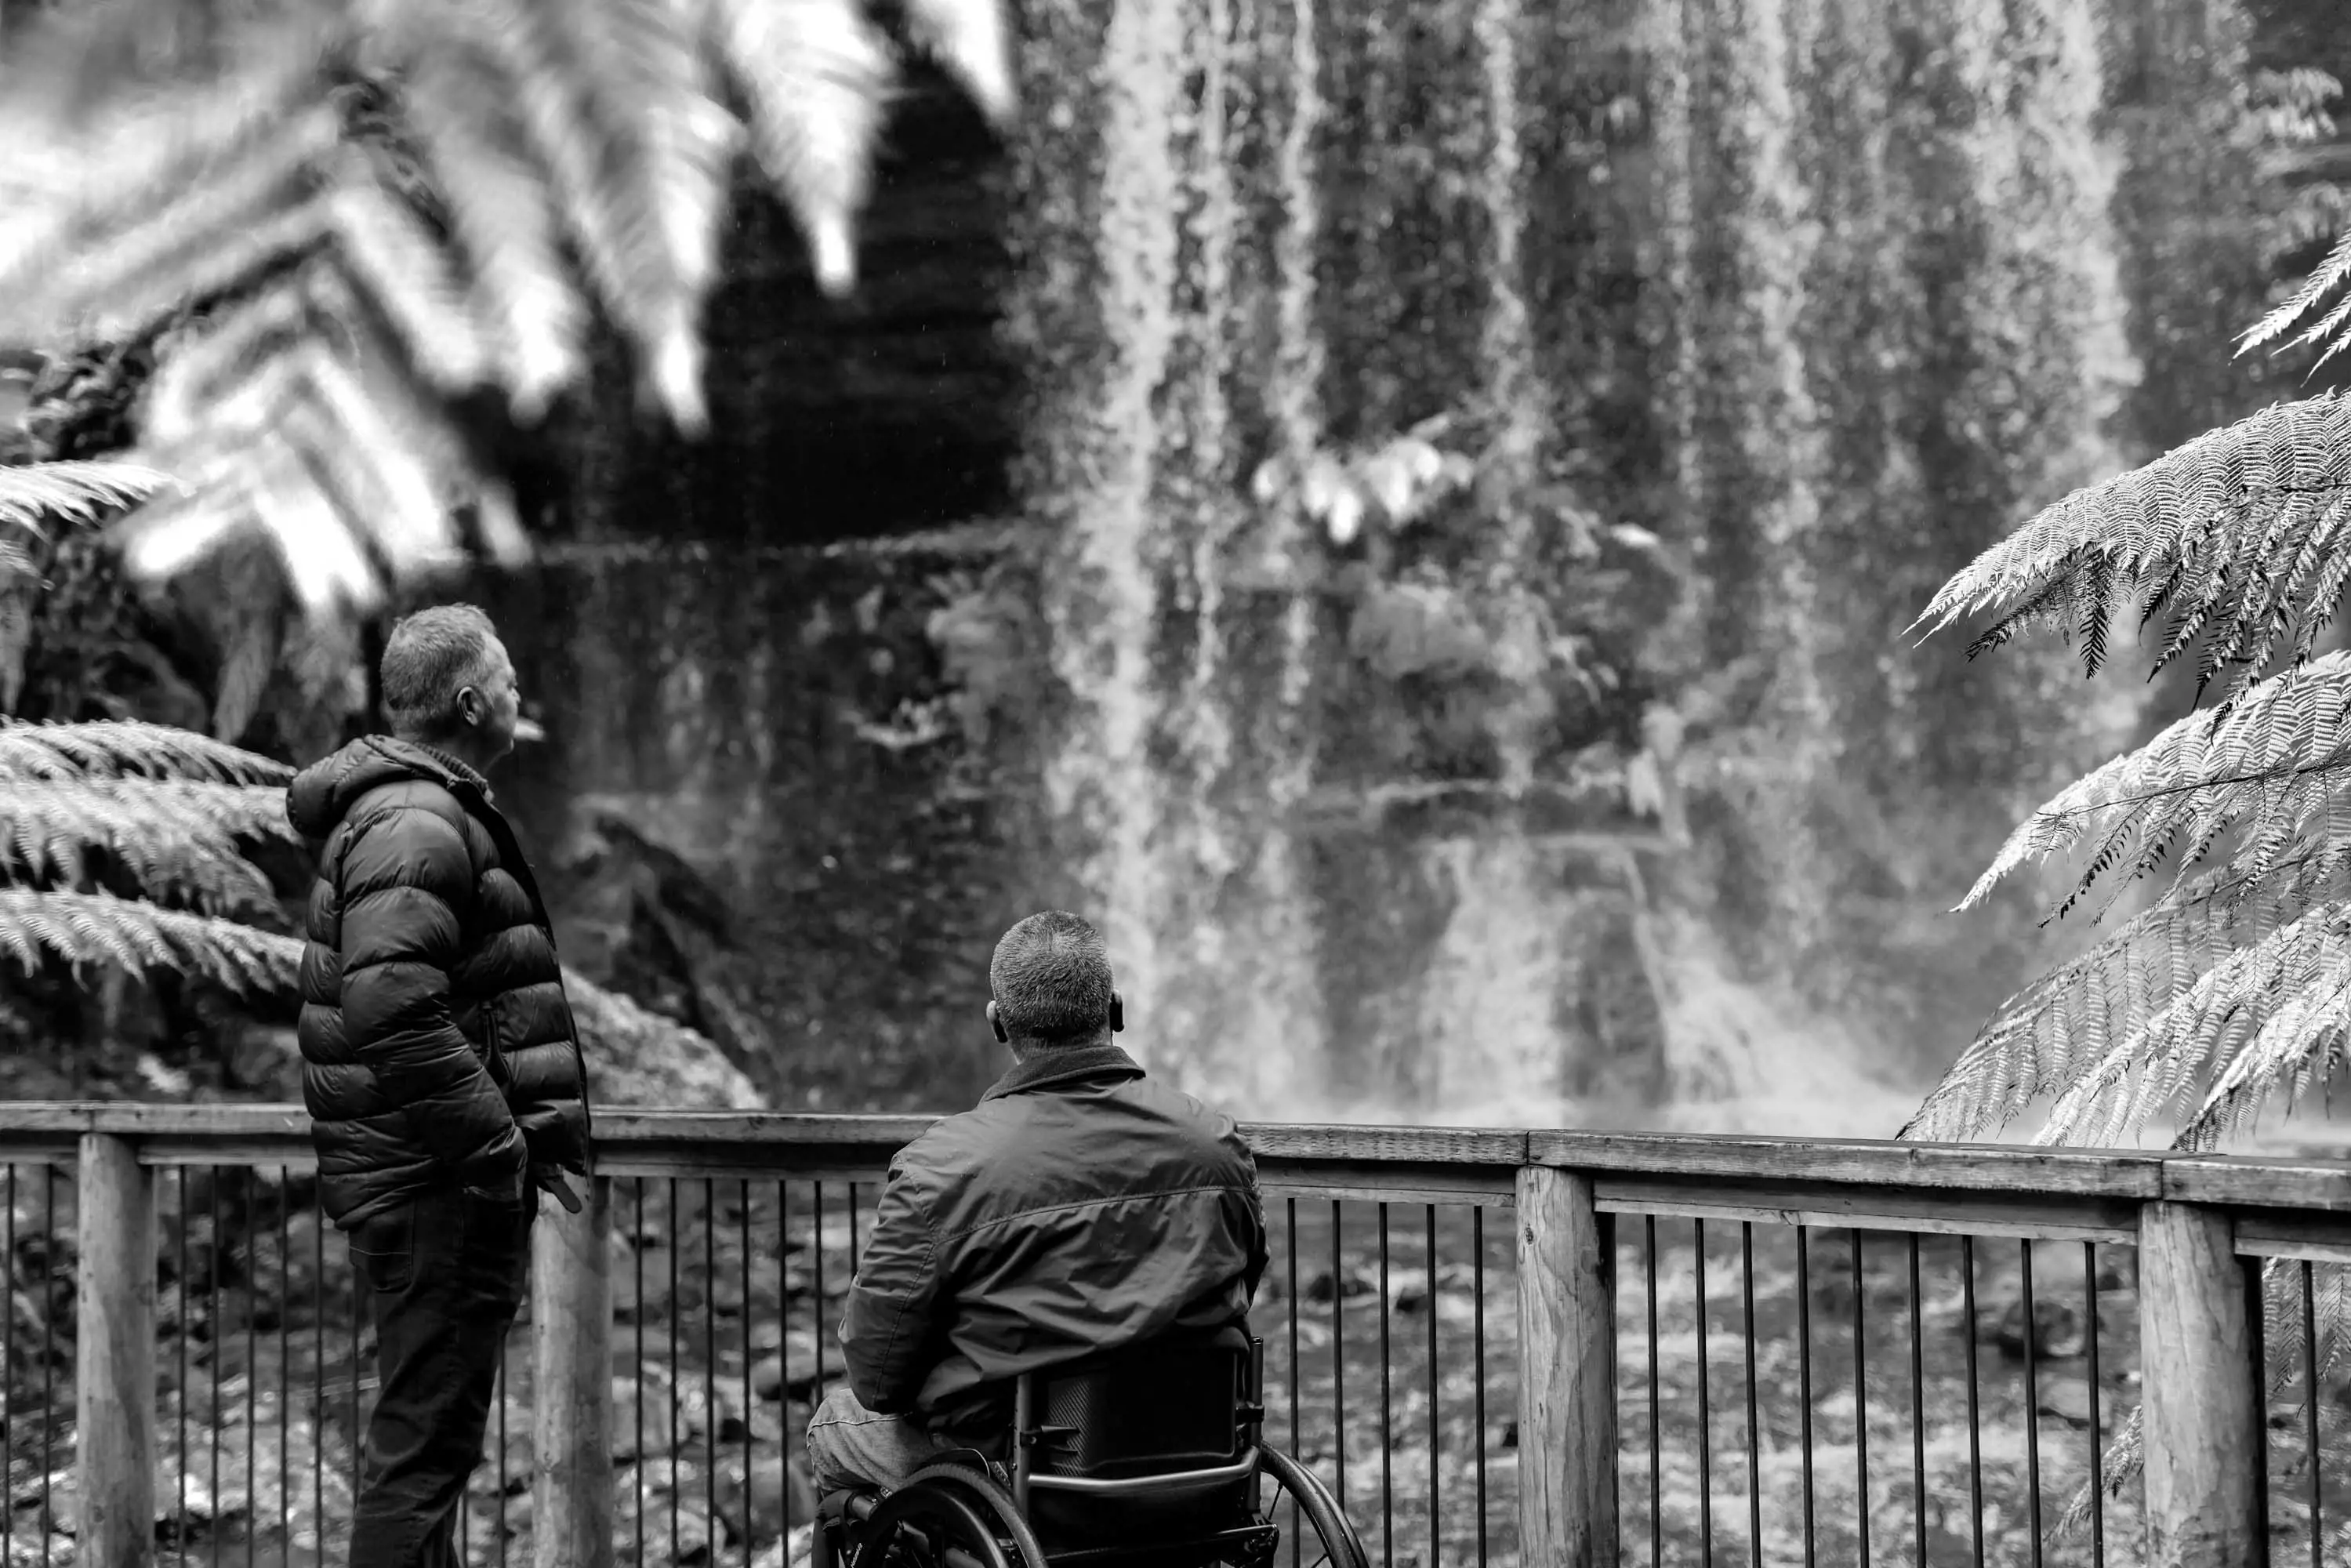 A man in a jacket and another man in a wheelchair stop near a handrail in front of a waterfall to observe.